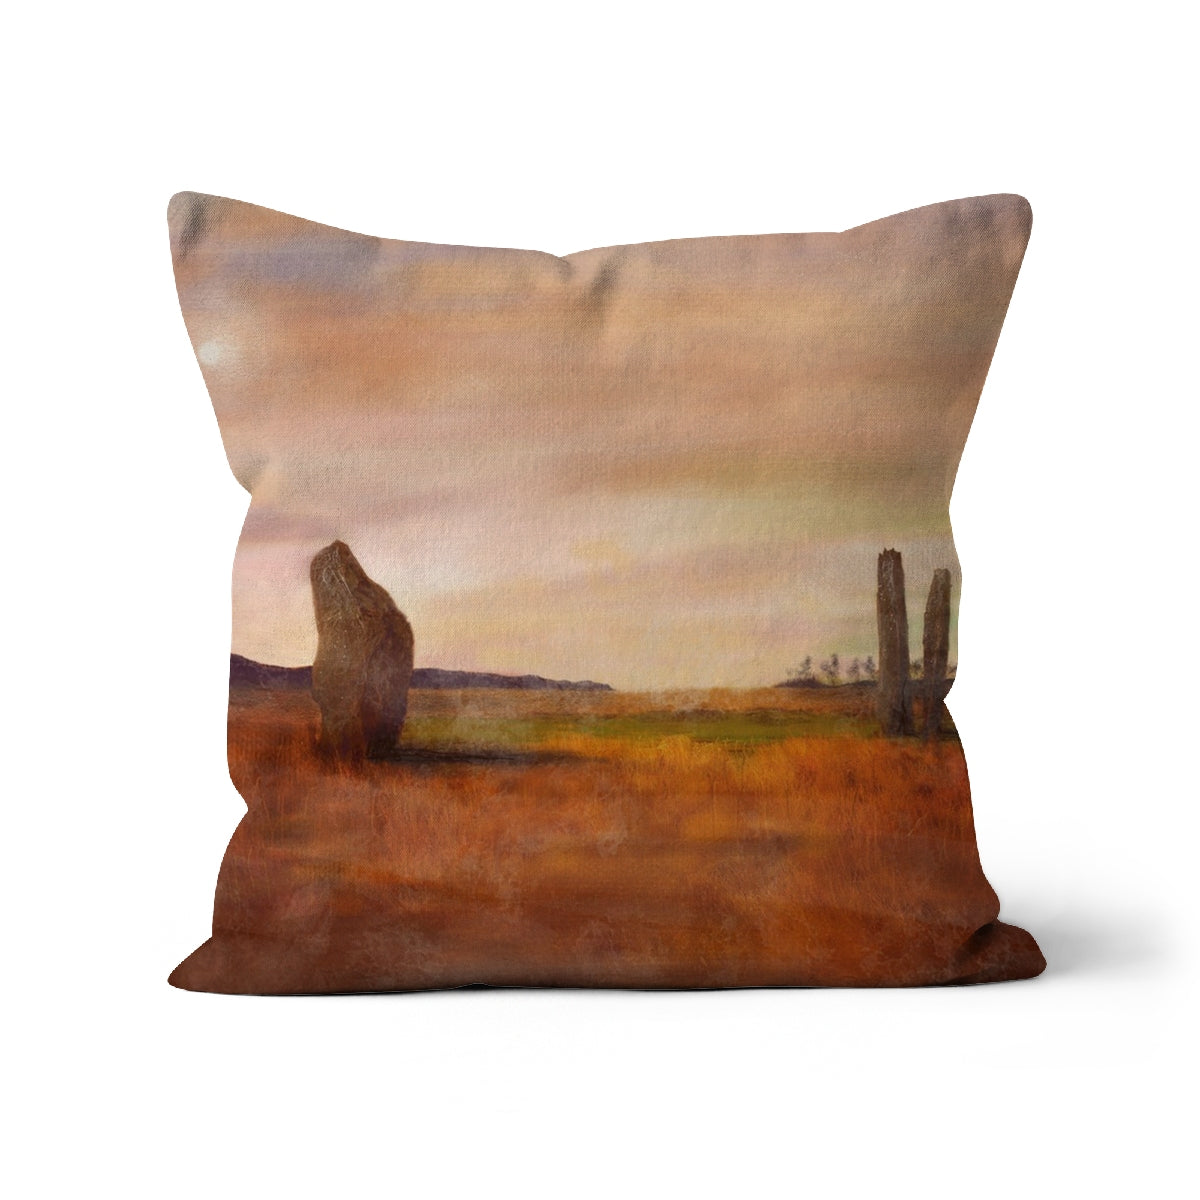 Machrie Moor Arran Art Gifts Cushion-Cushions-Arran Art Gallery-Canvas-18"x18"-Paintings, Prints, Homeware, Art Gifts From Scotland By Scottish Artist Kevin Hunter